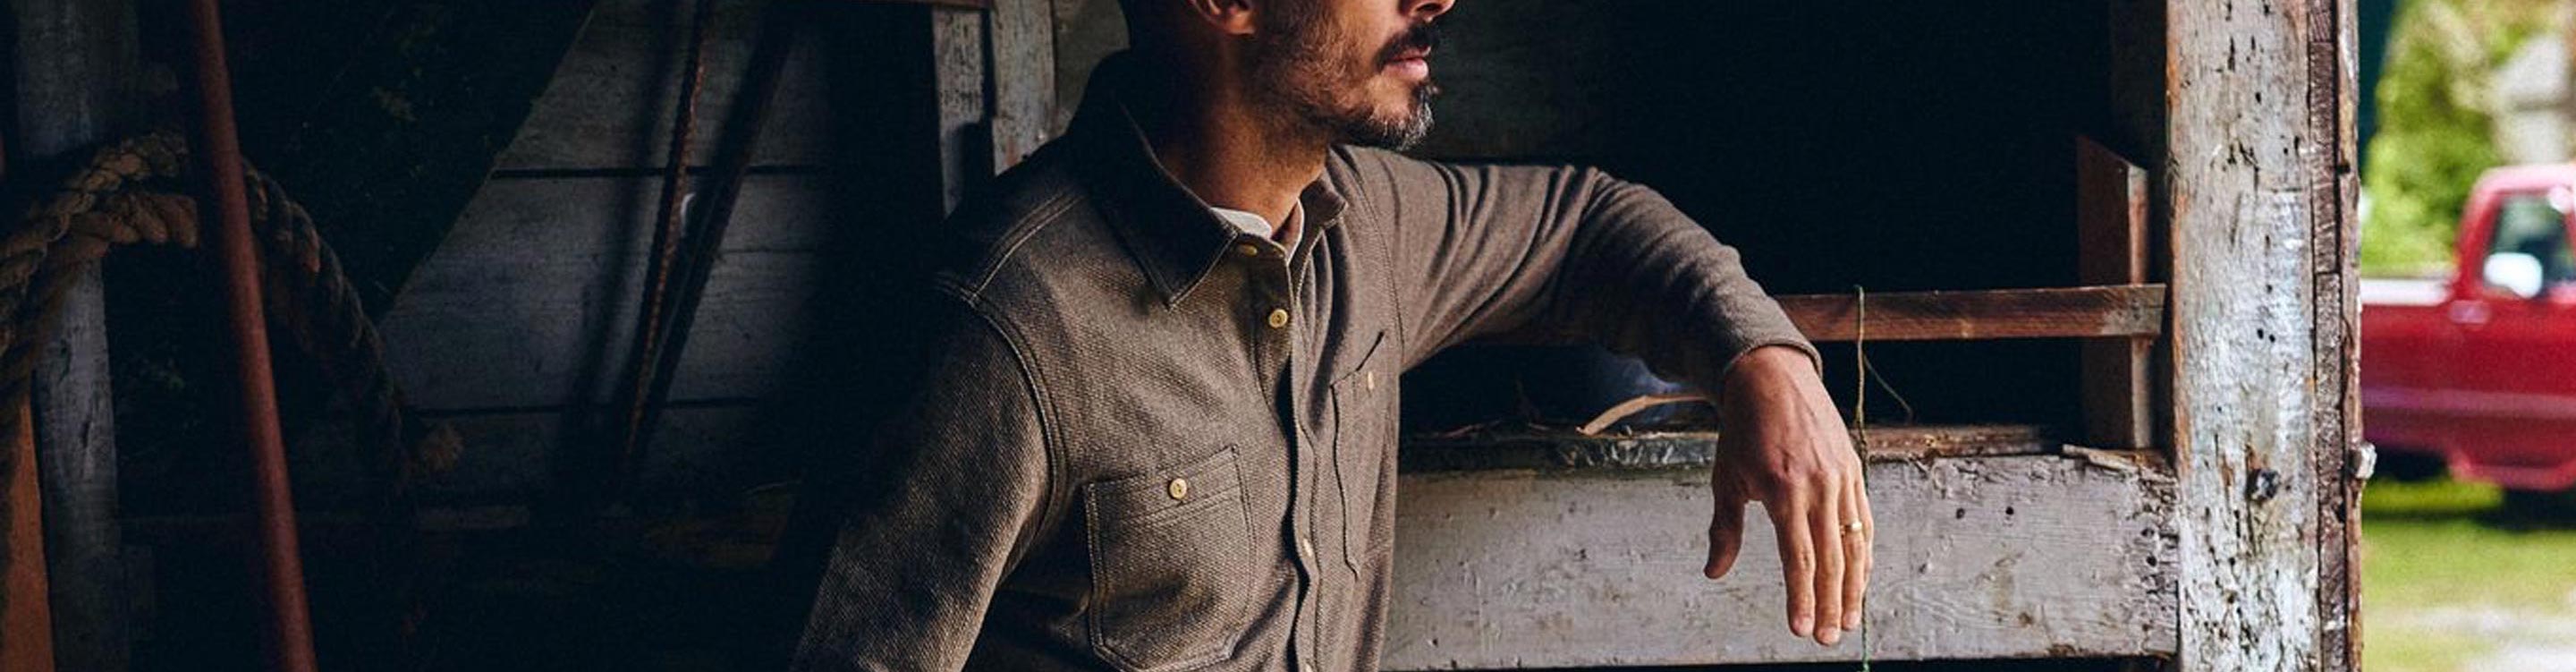 Knit Knit | Men Stitch - The for Twill Shirt Utility Shirts in Taylor